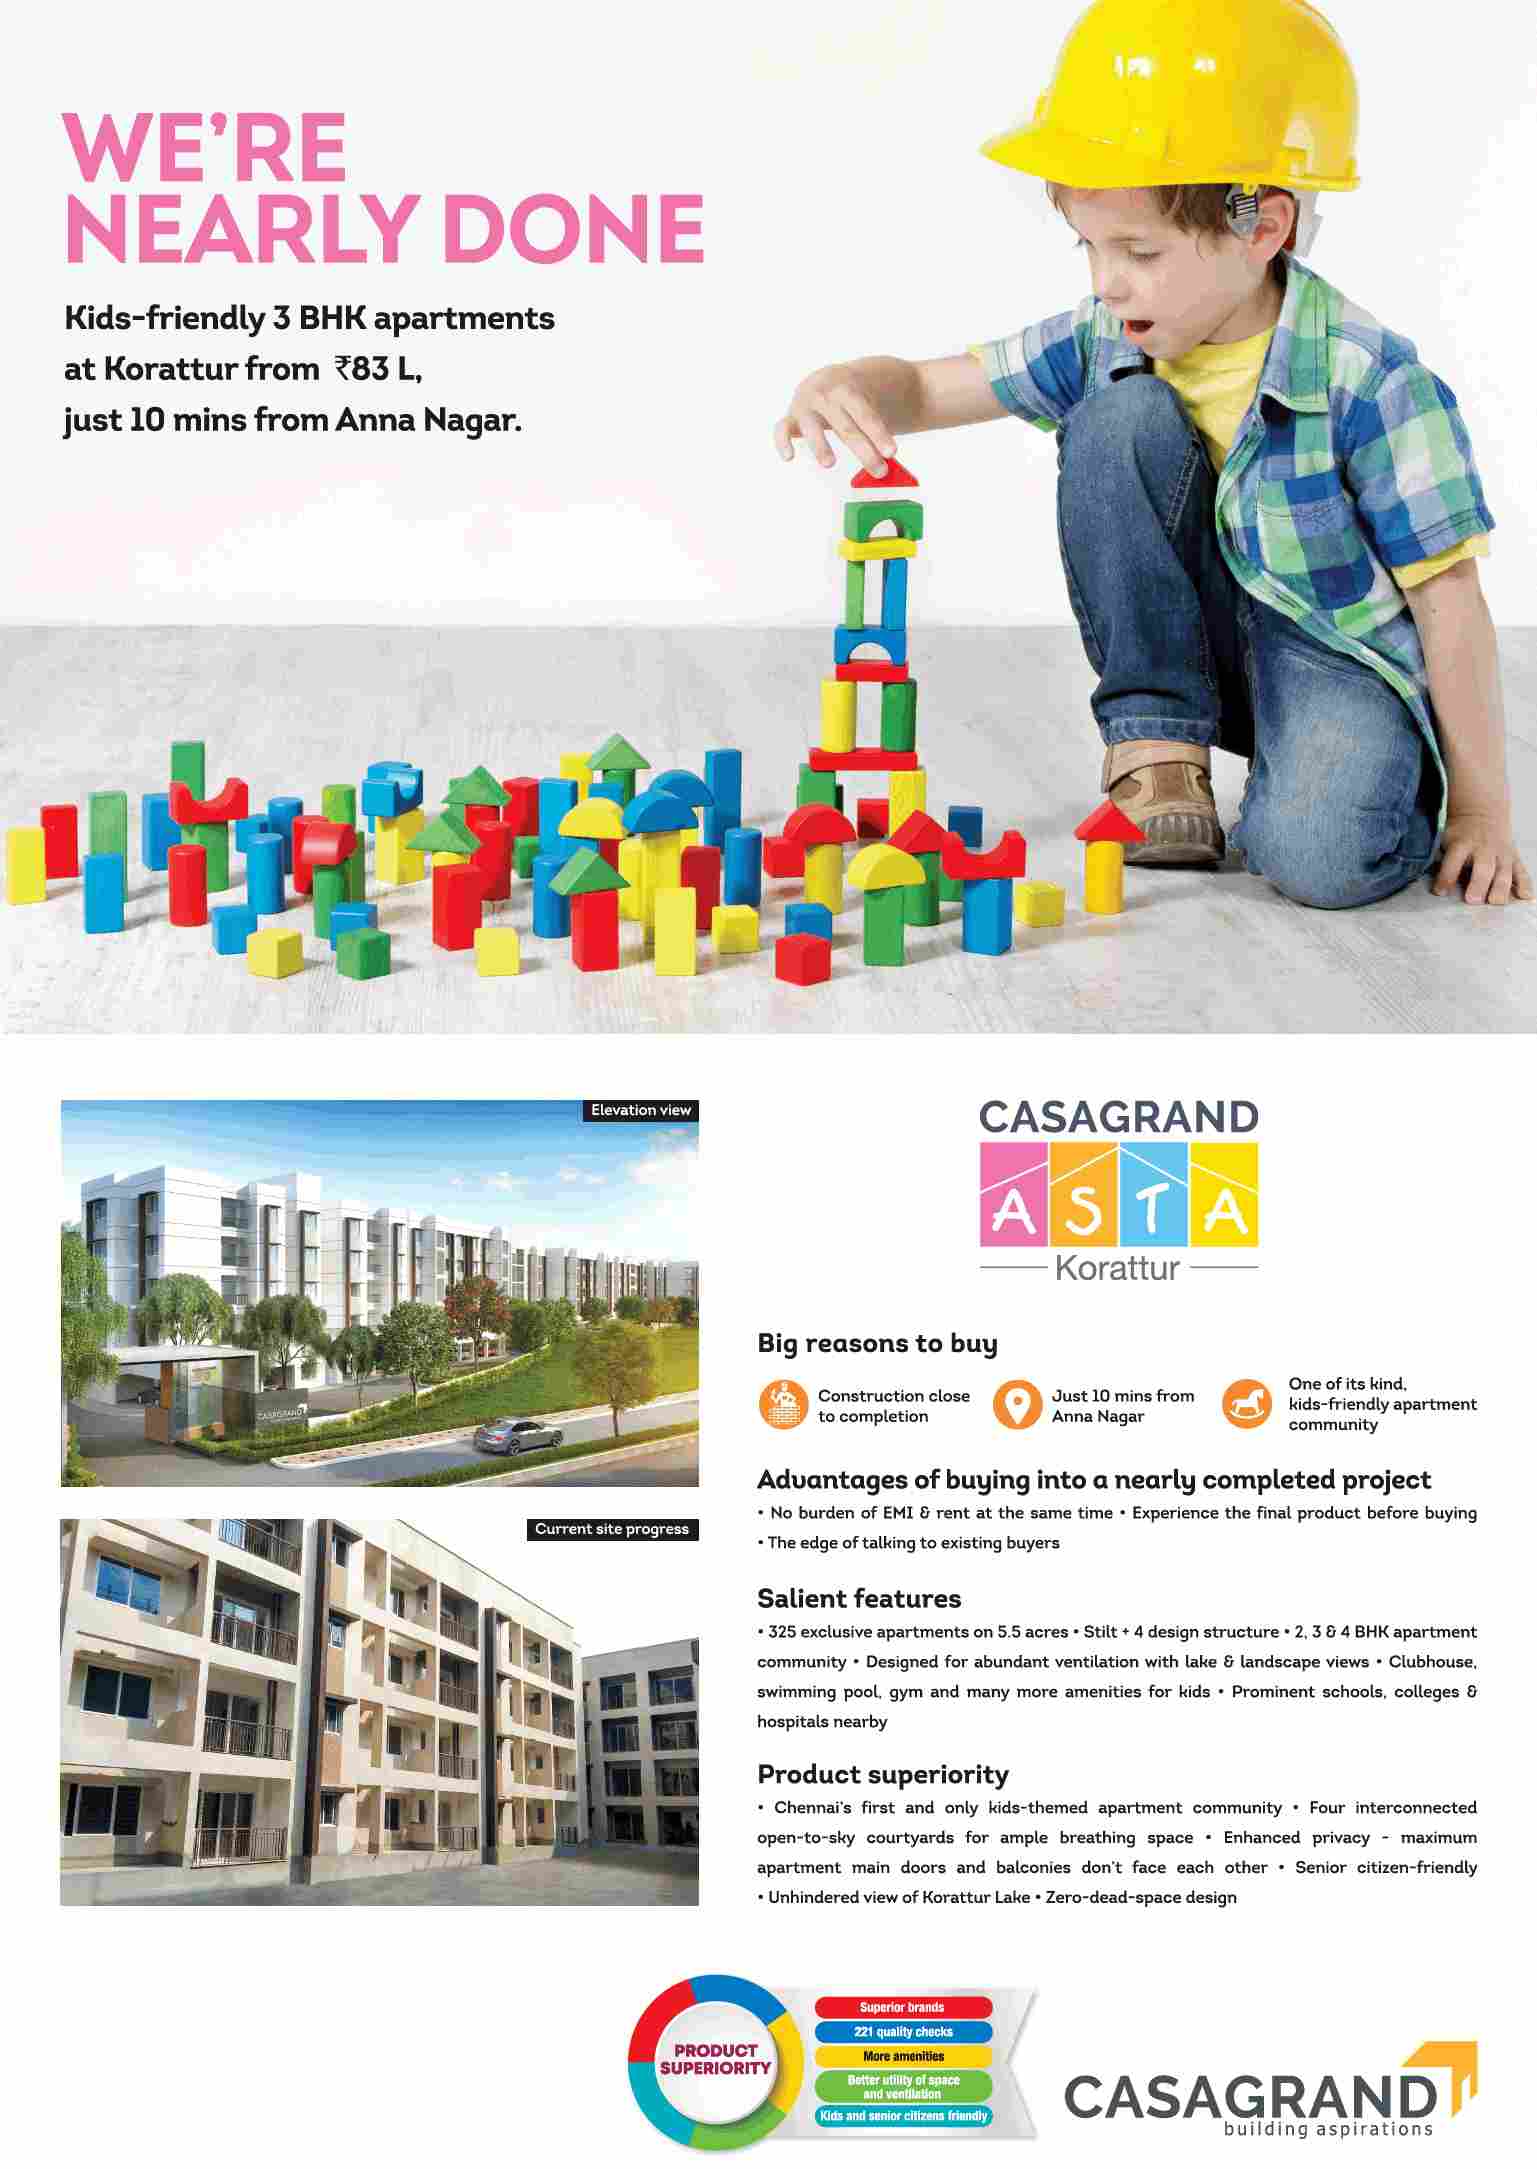 Construction close to completion at Casagrand Asta in Ambattur, Chennai